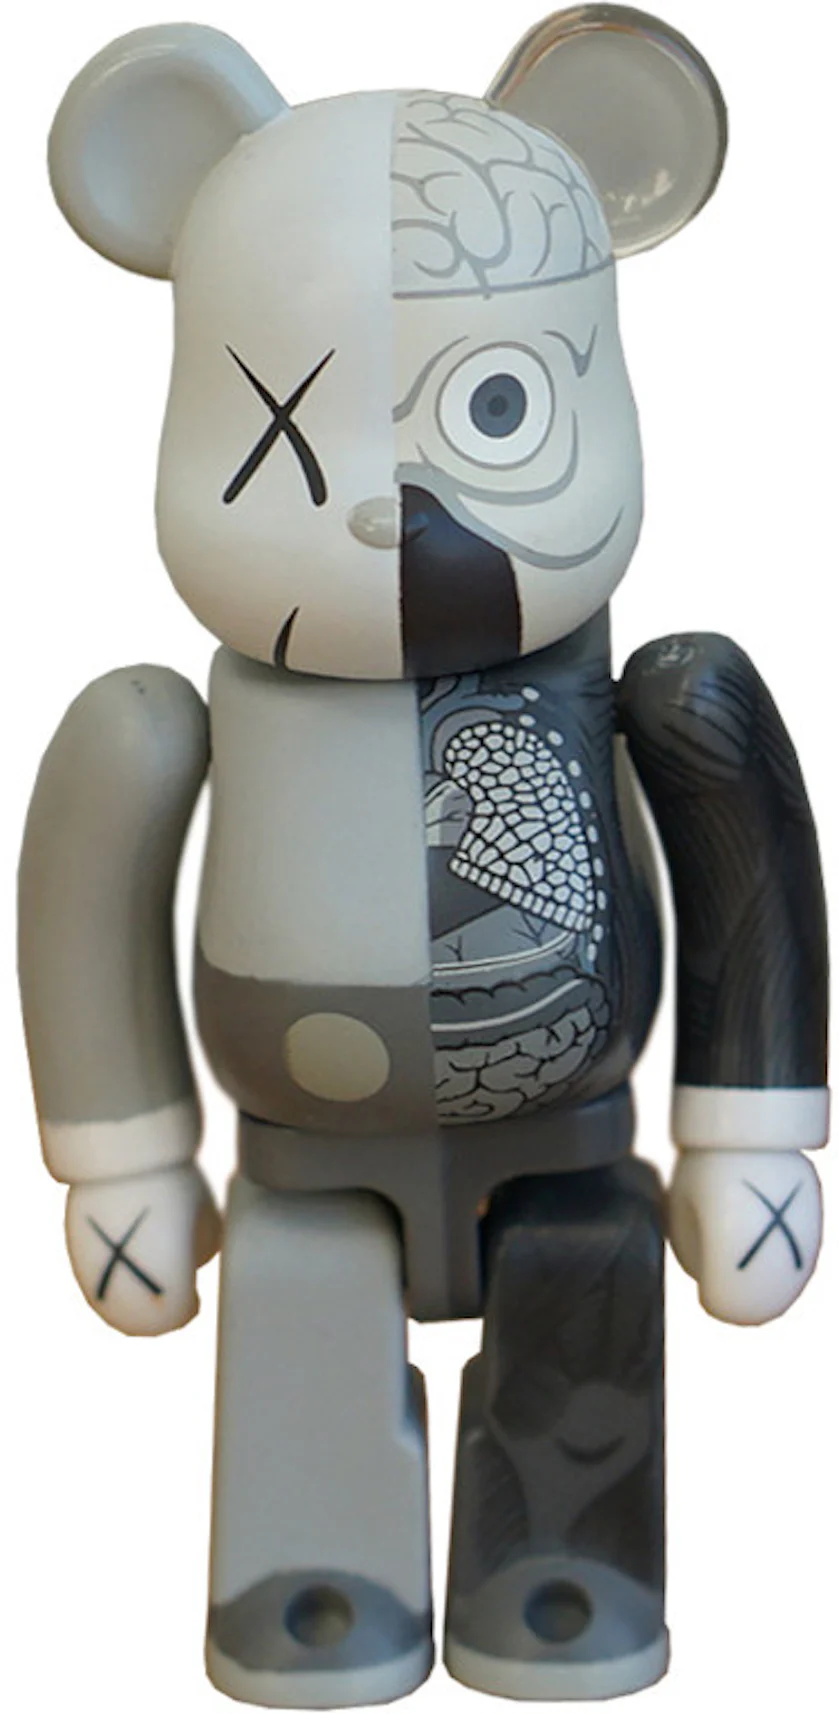 Bearbrick' to 'FlyBoy': Figurines like KAWS that you can buy